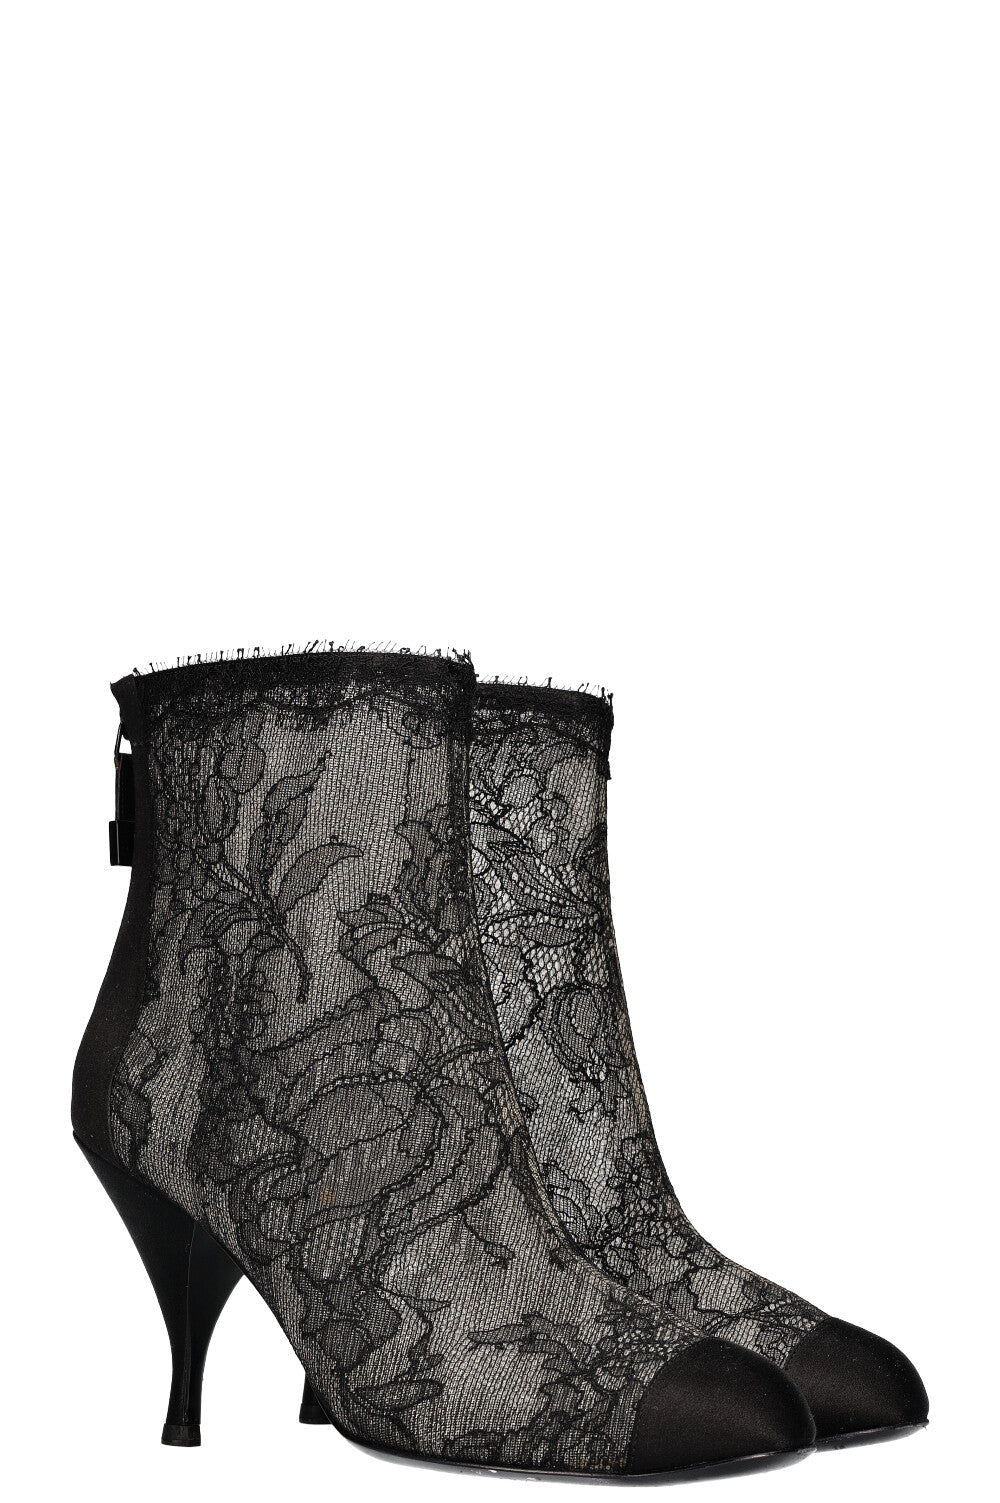 CHANEL Lace Ankle Boots Black